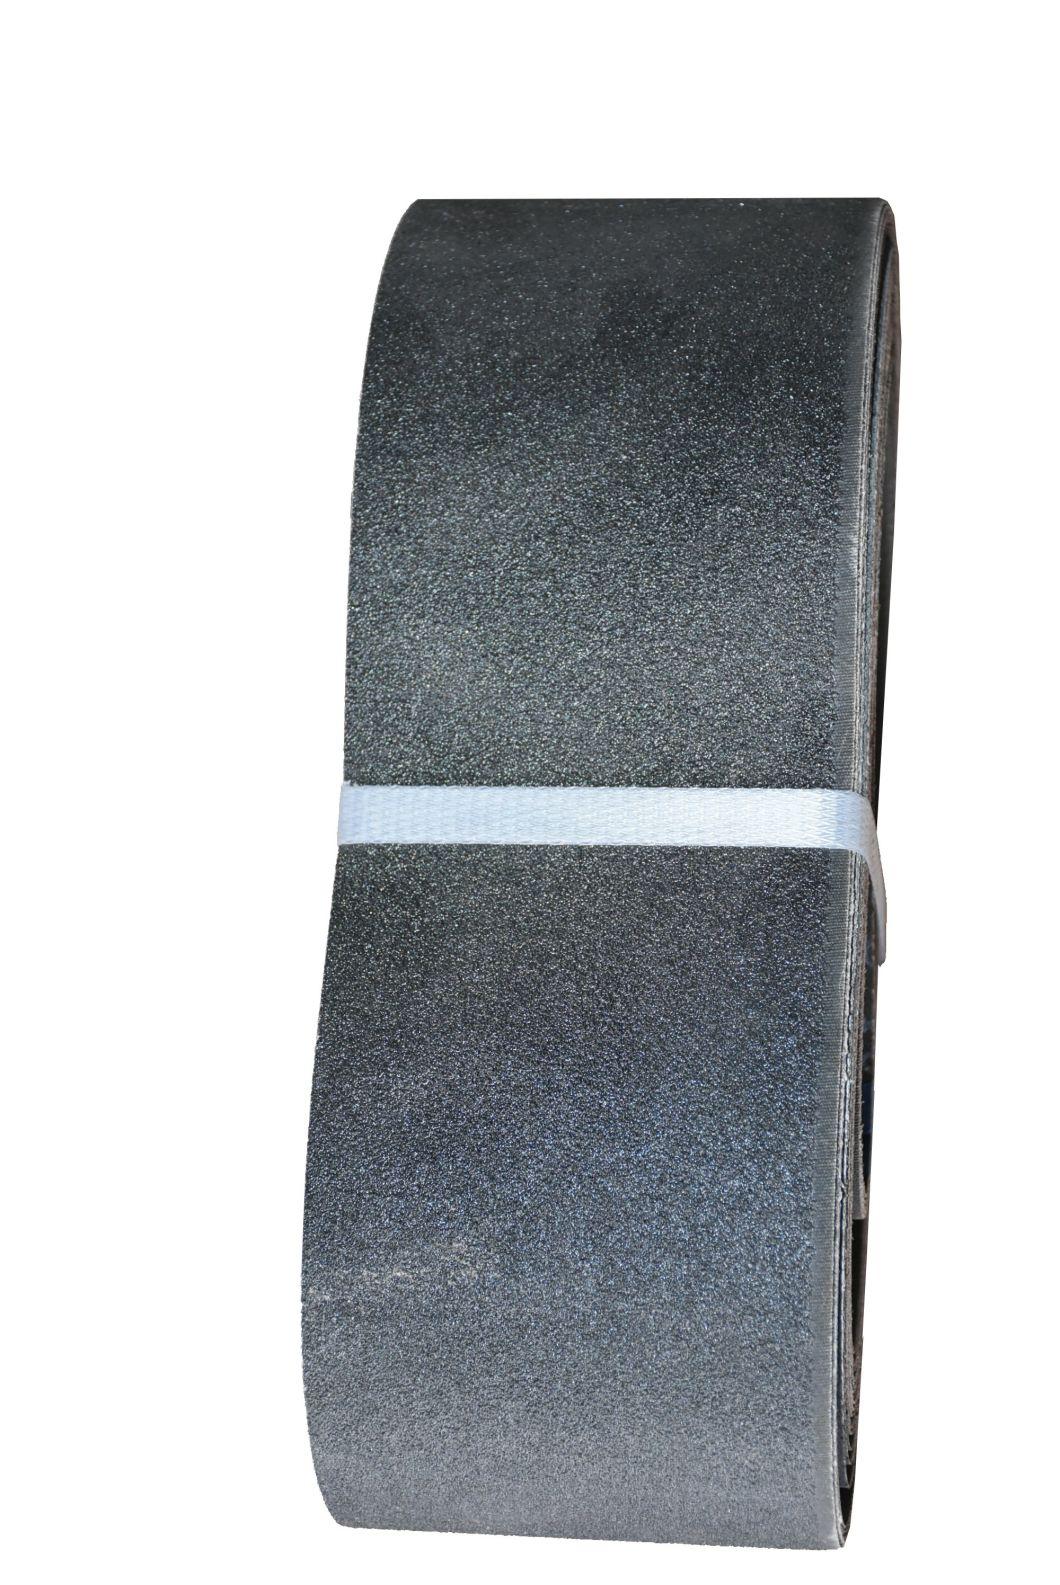 High Quality Abrasive Belt with Silicon Carbide for Metal